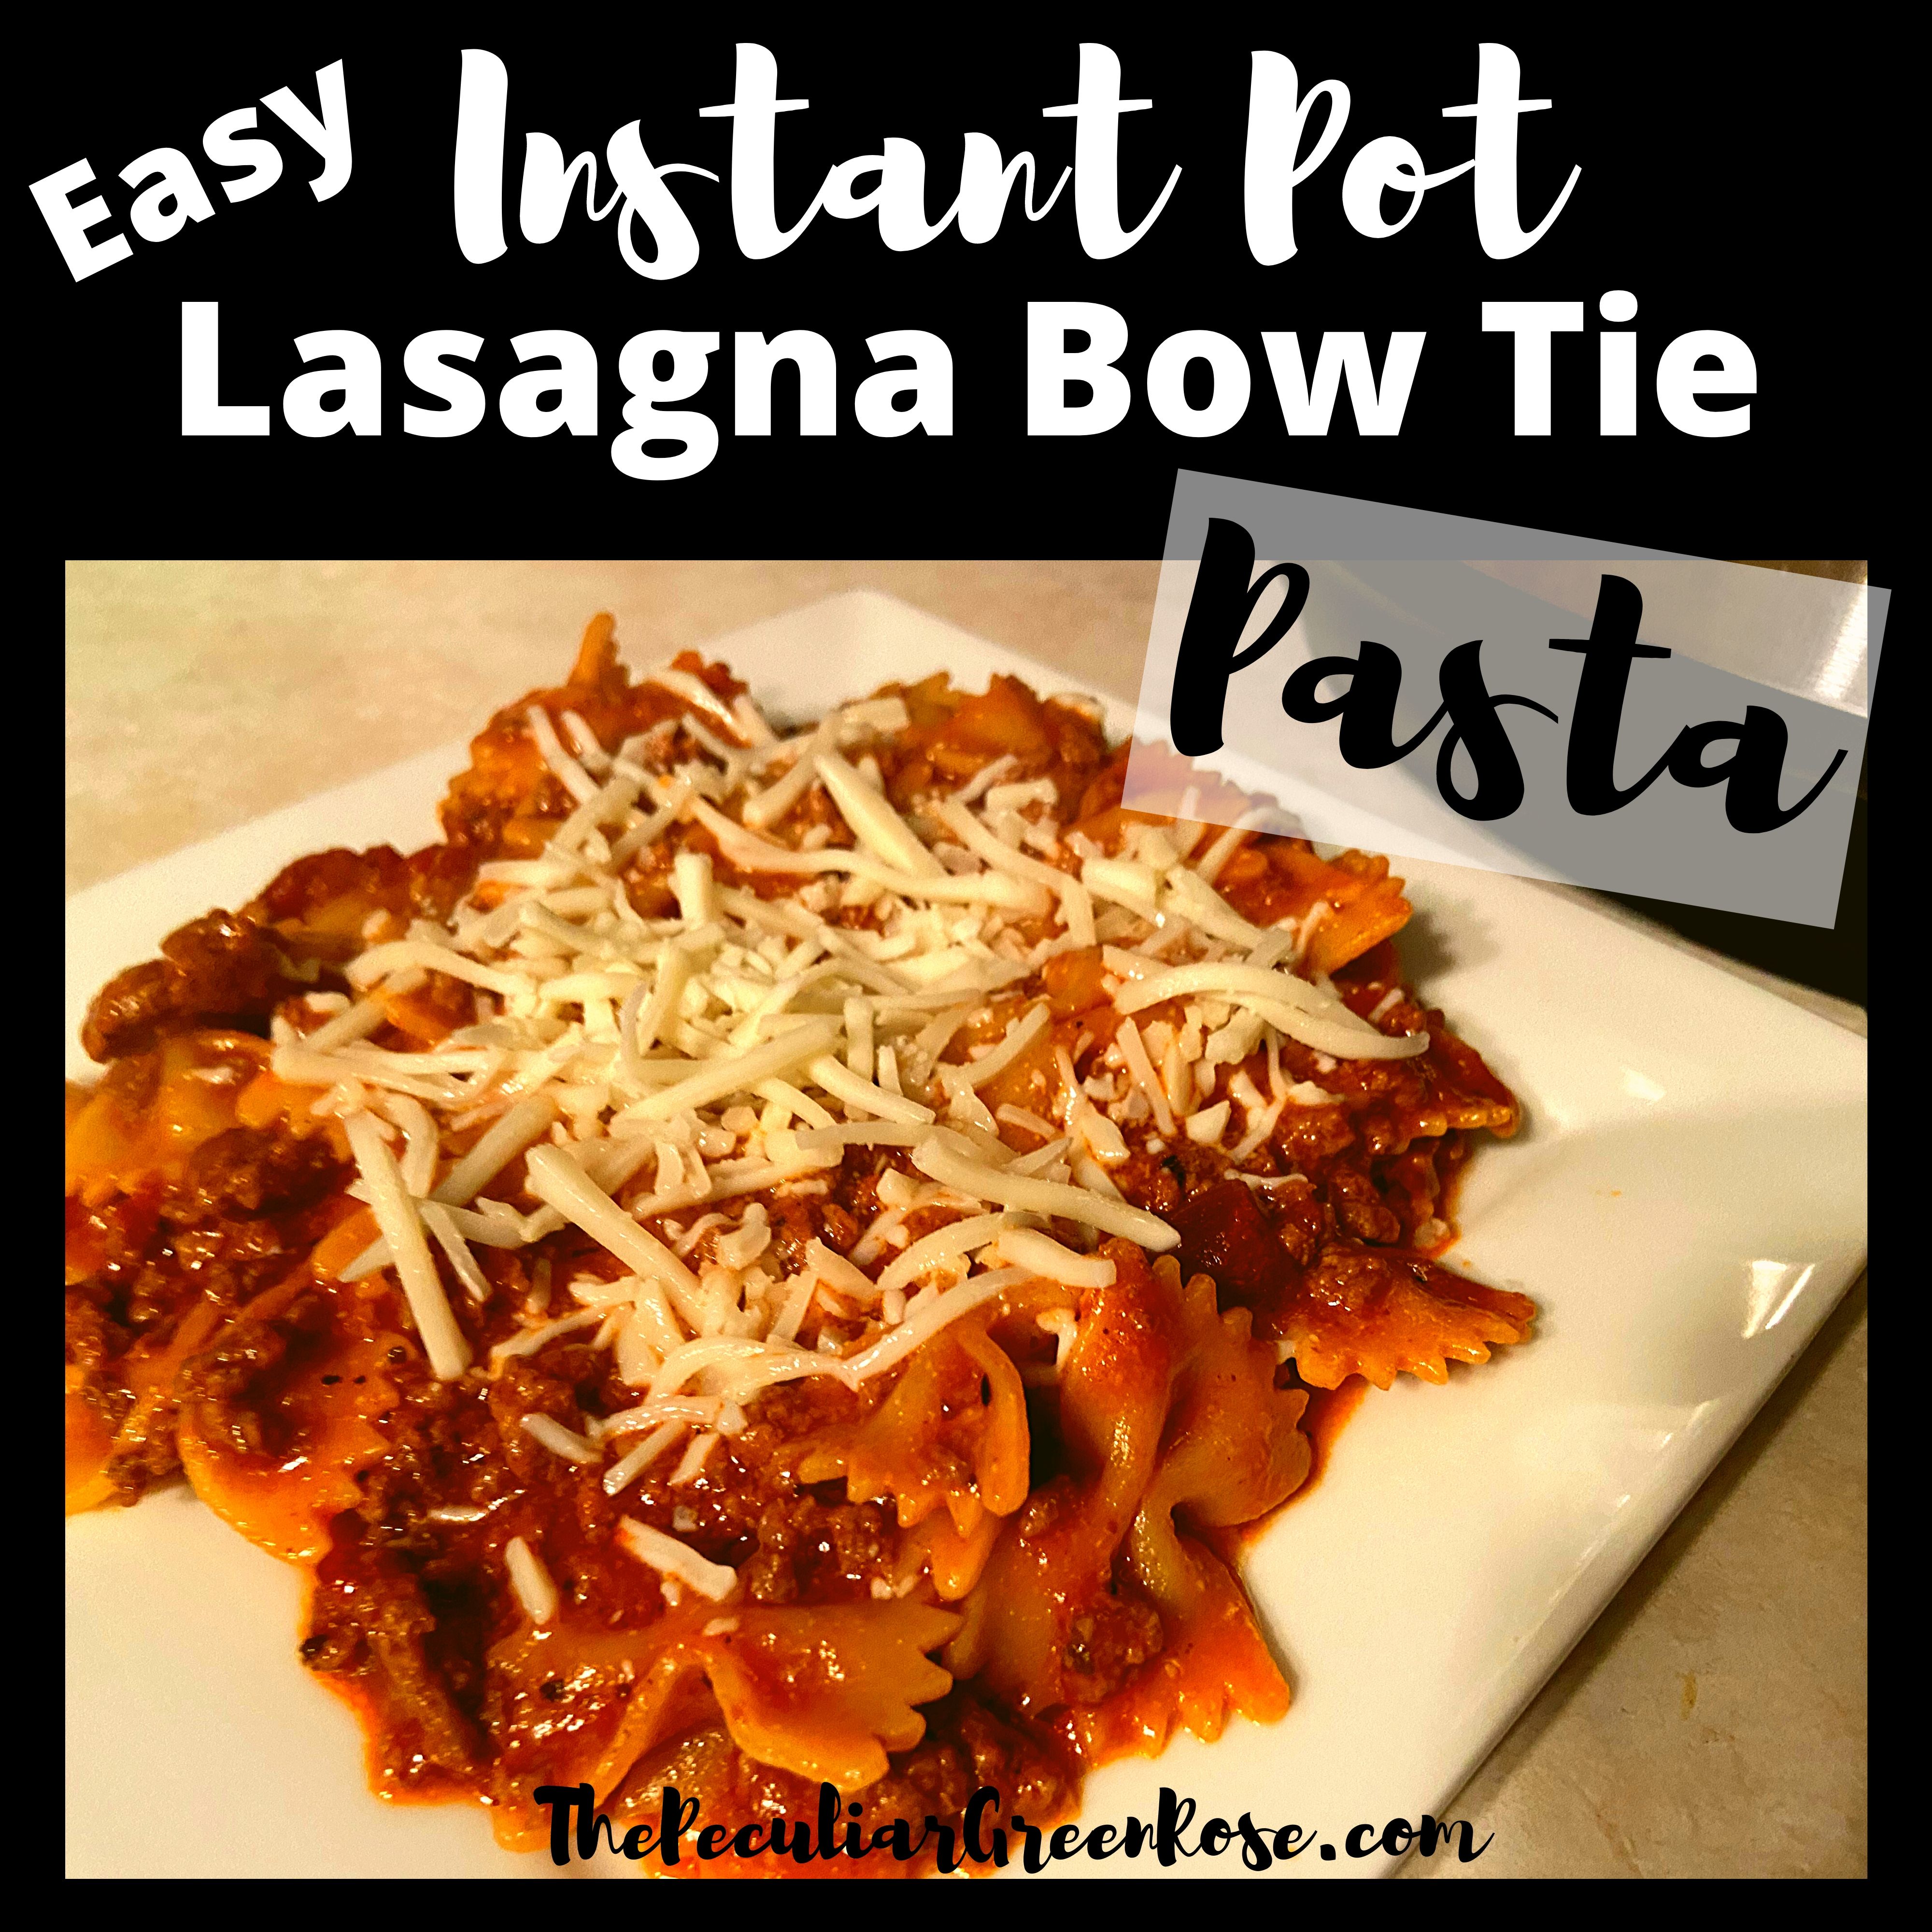 A square plate filled with Easy Instant Pot Lasagna Bow Tie Pasta sitting on a kitchen counter in front of an Instant Pot.